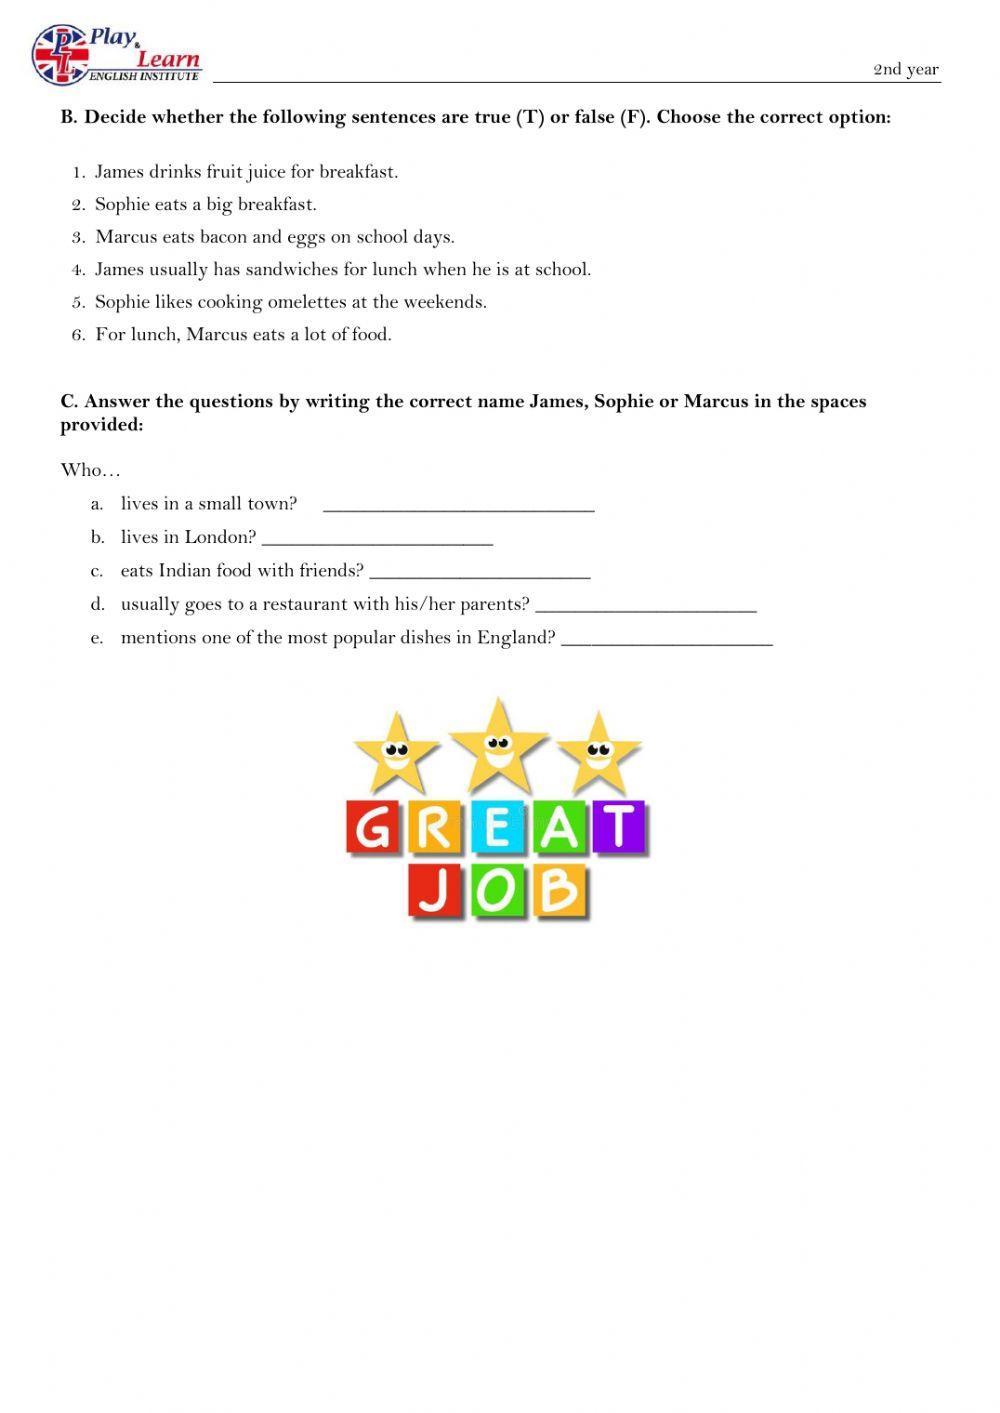 Reading Comprehension Test - 2nd year